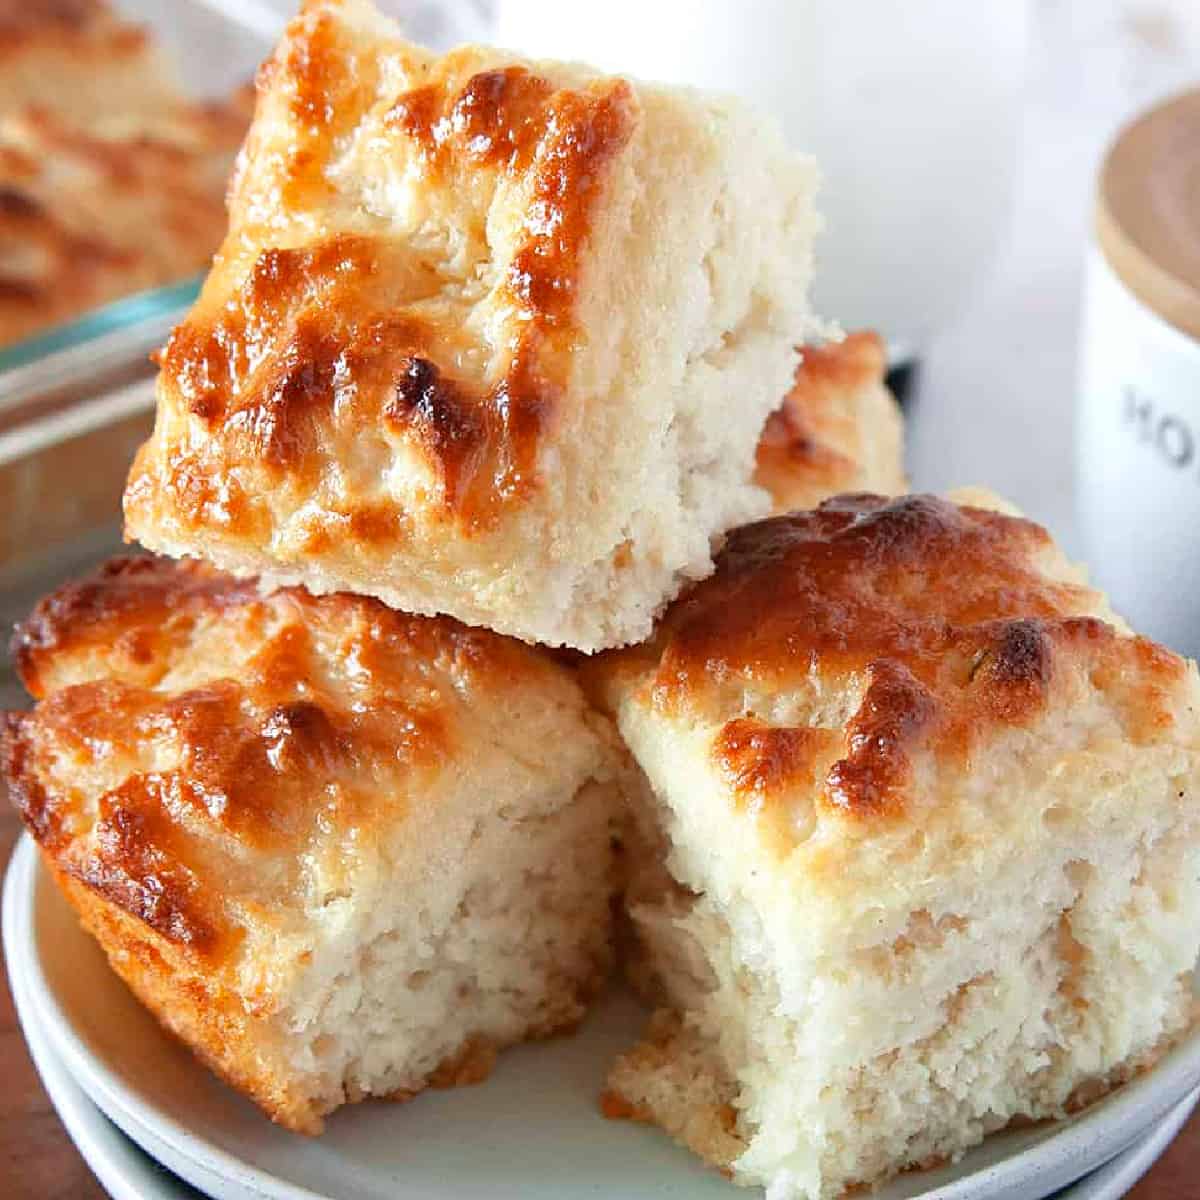 Biscuits stacked on each other on a plate showing their buttery golden brown tops. 